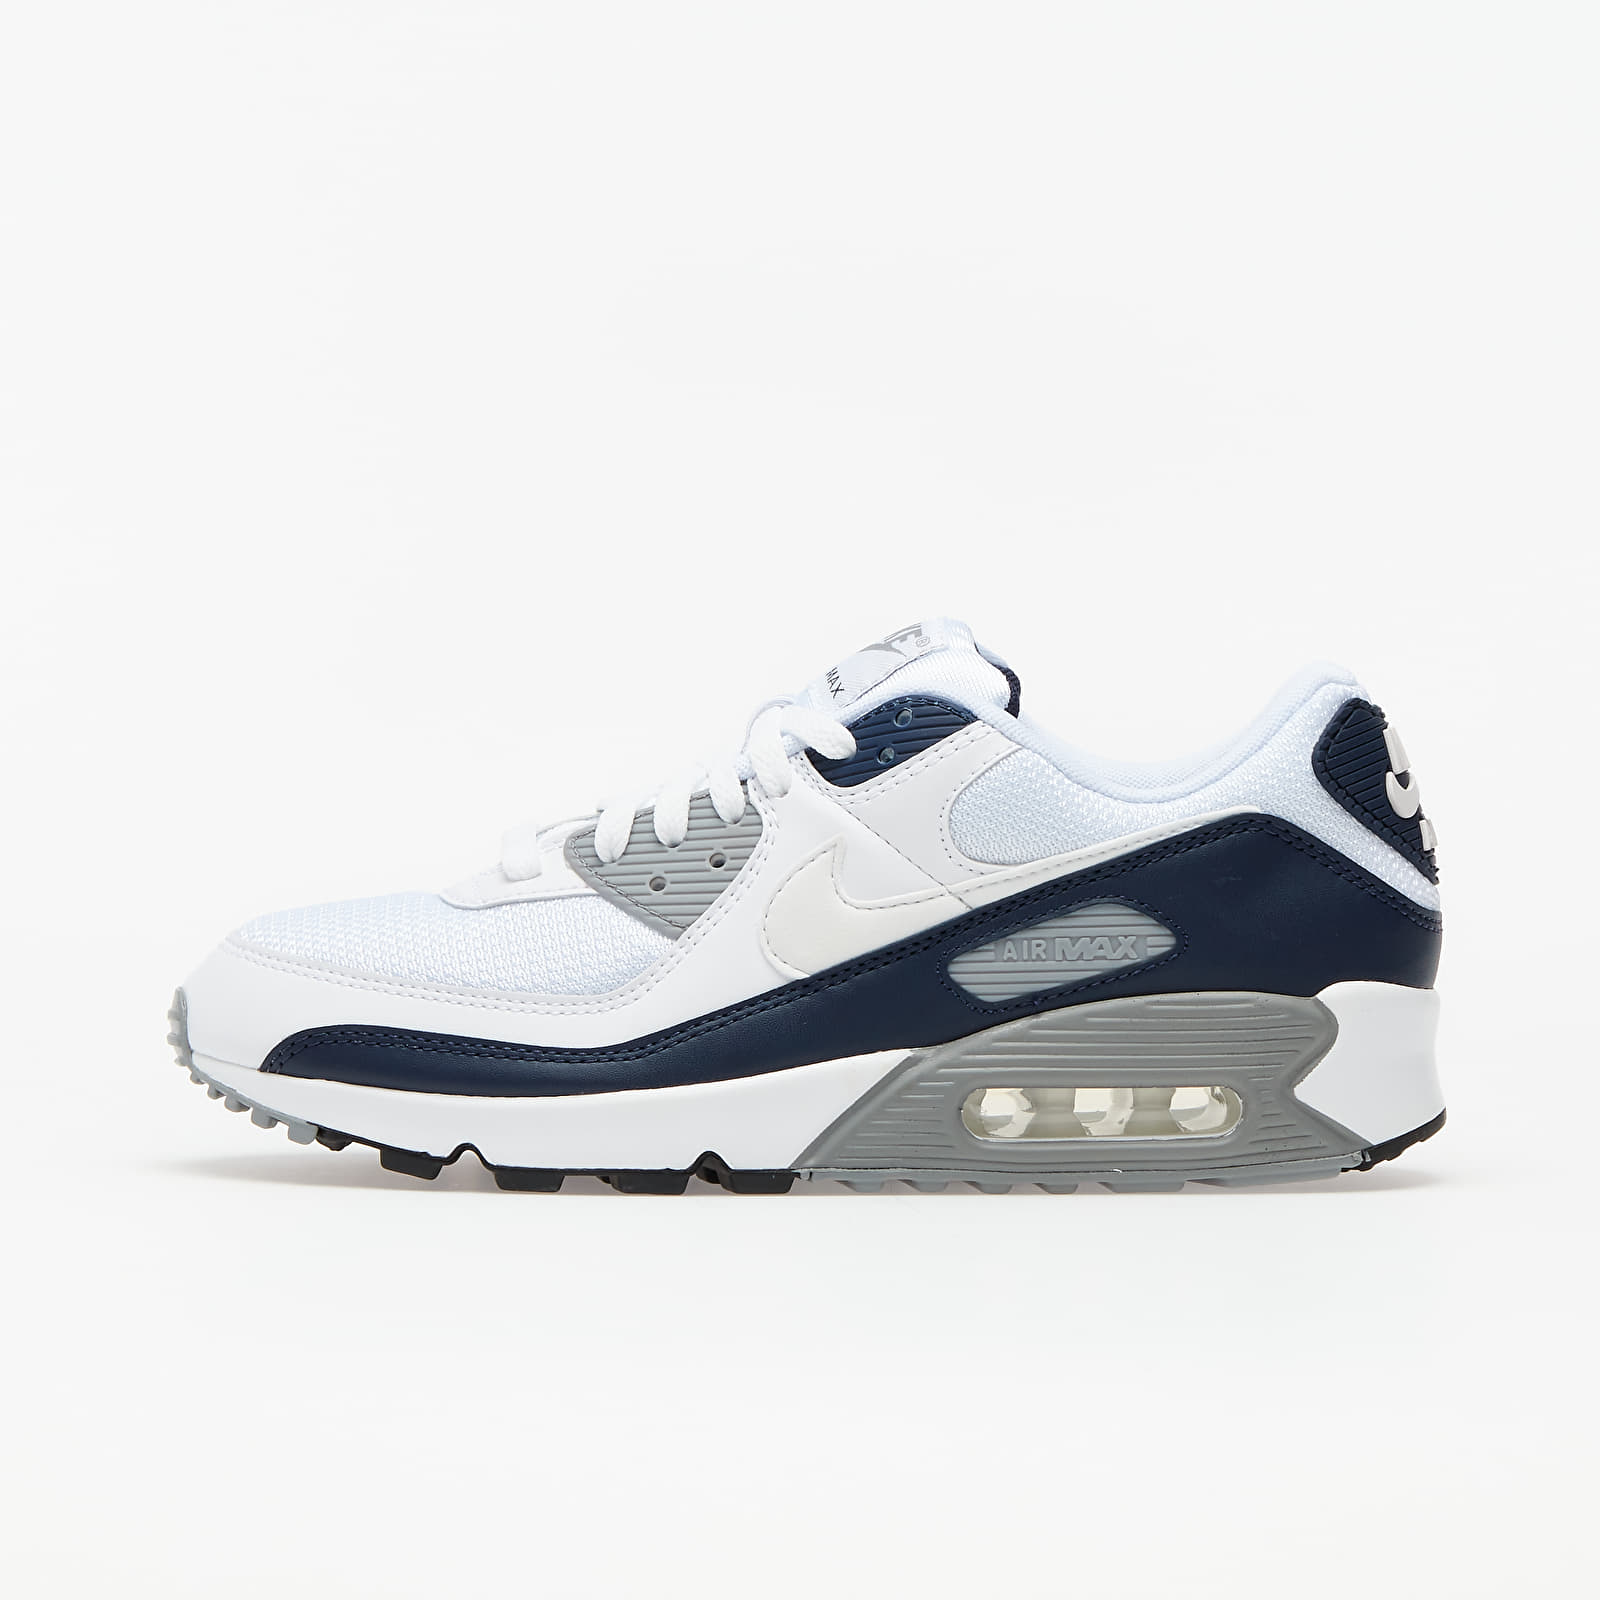 Nike Air Max 90 White/ White-Particle Grey-Obsidian CT4352-100